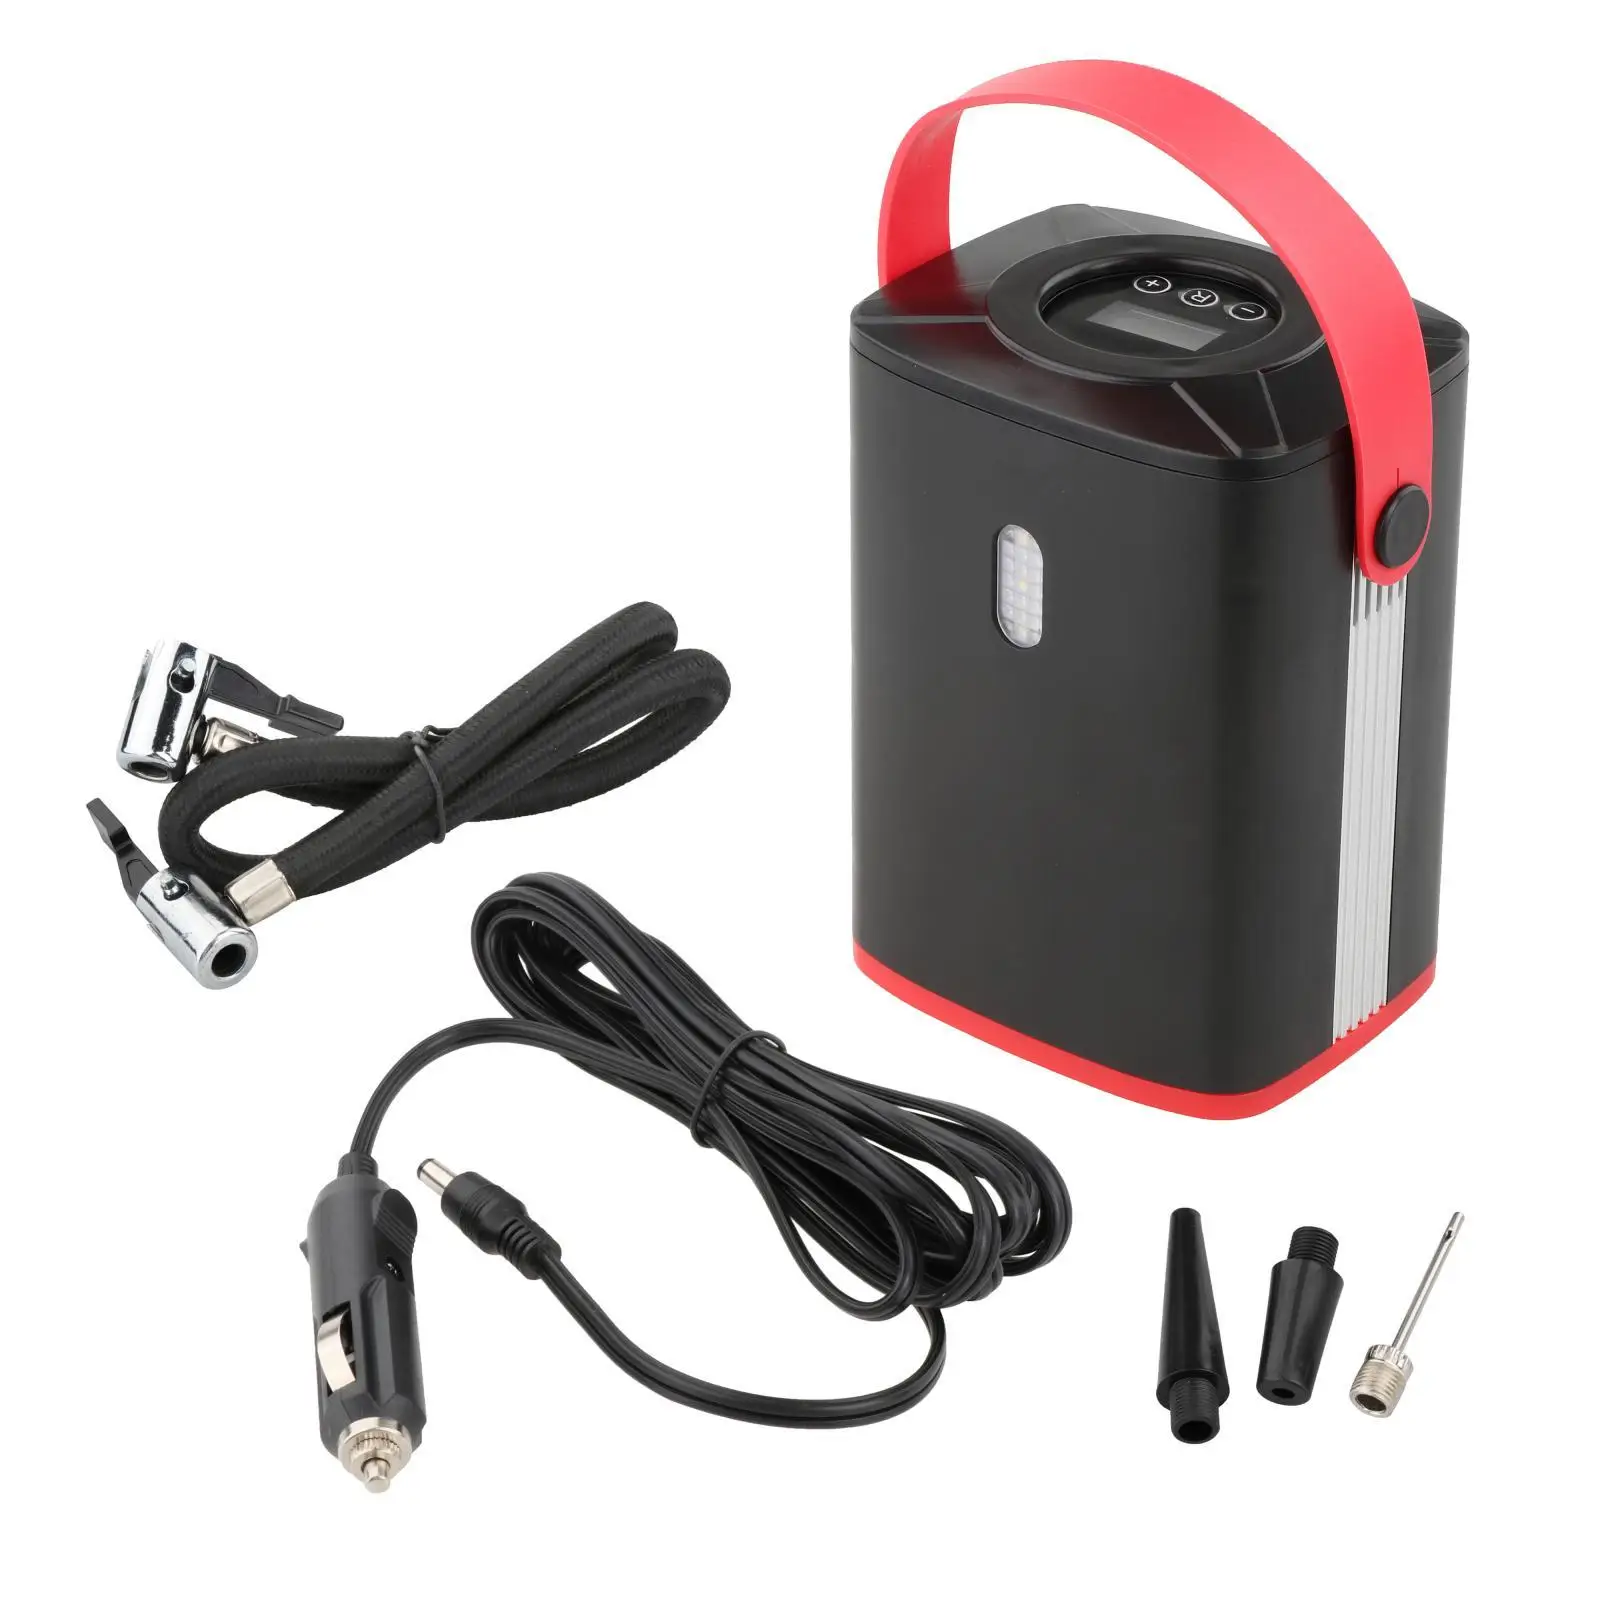 Car Tyre Inflator DC 12V 150 PSI with LED Light Tyre Pump for Bikes Balls /Shut Off Emergency Flashlight Tyre Inflation